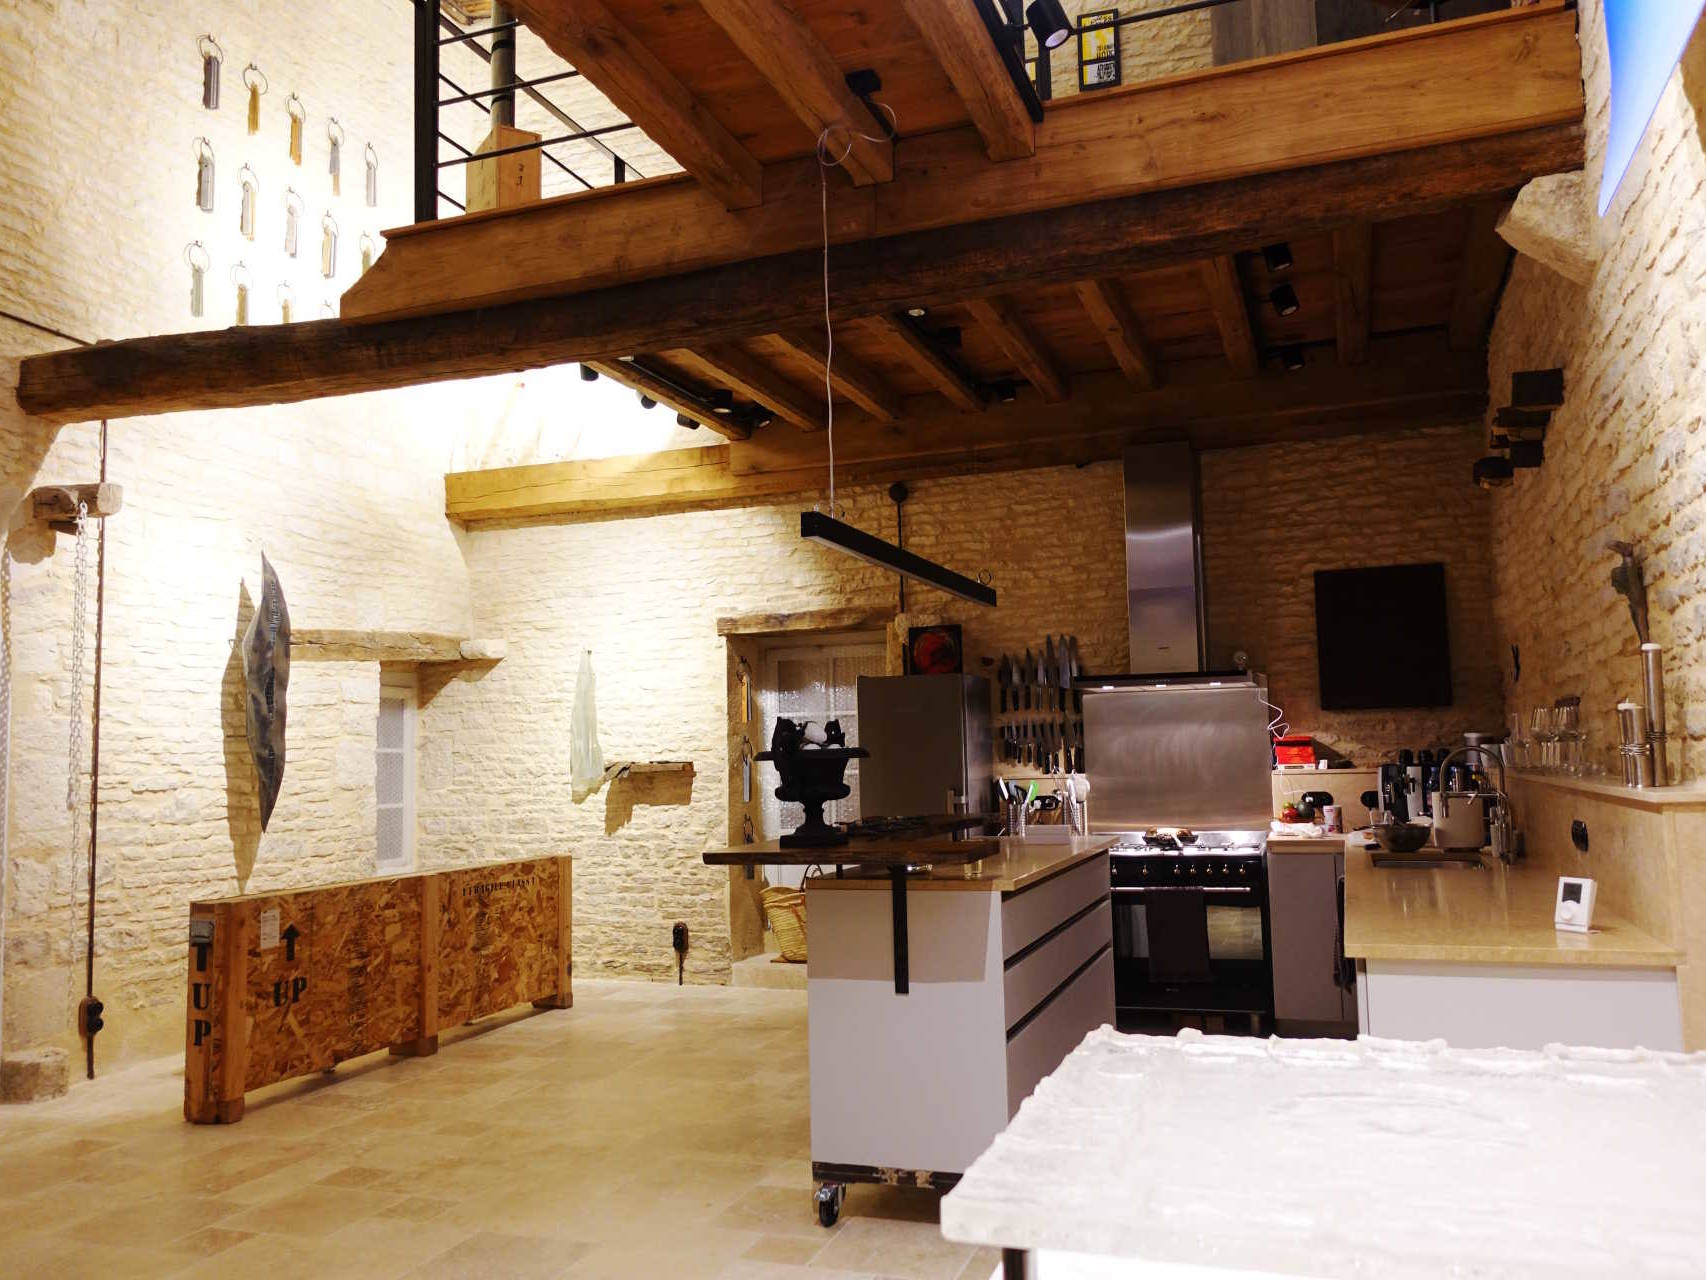 15th century barn conversion - view to kitchen